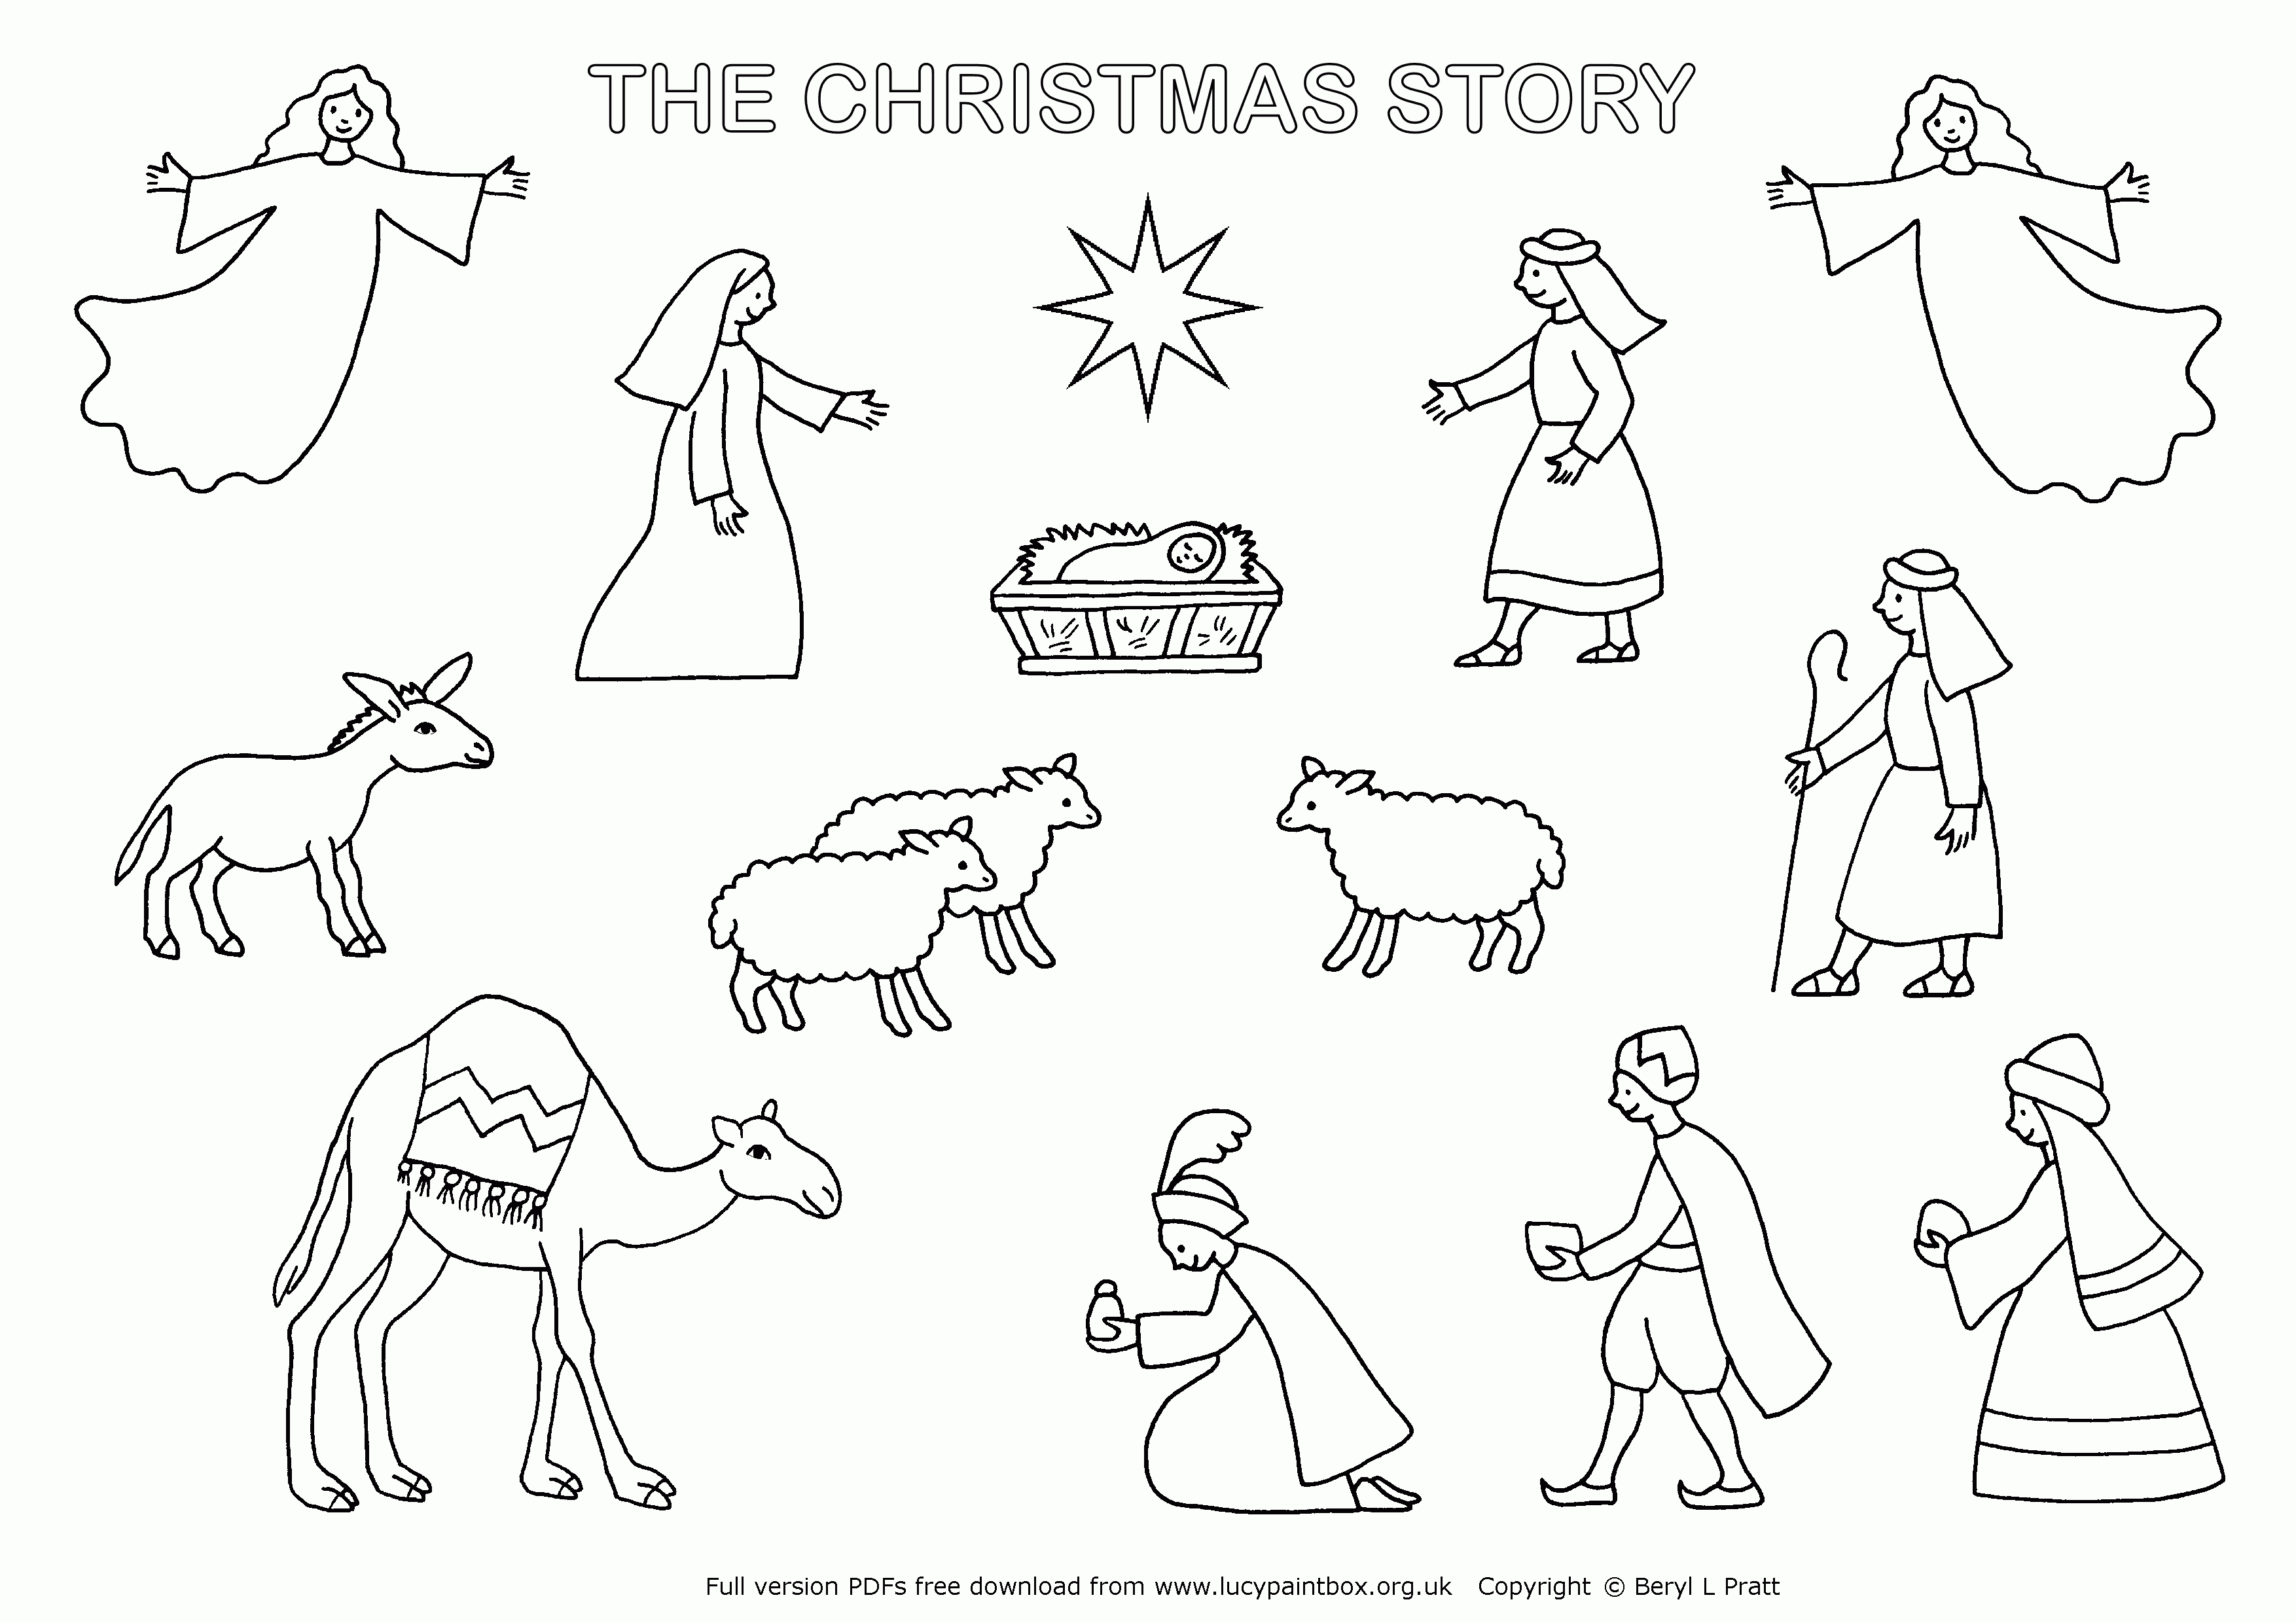 Lucypaintbox Org Uk Has A Lovely Nativity Scene That Also Stands Up - Free Printable Pictures Of Nativity Scenes